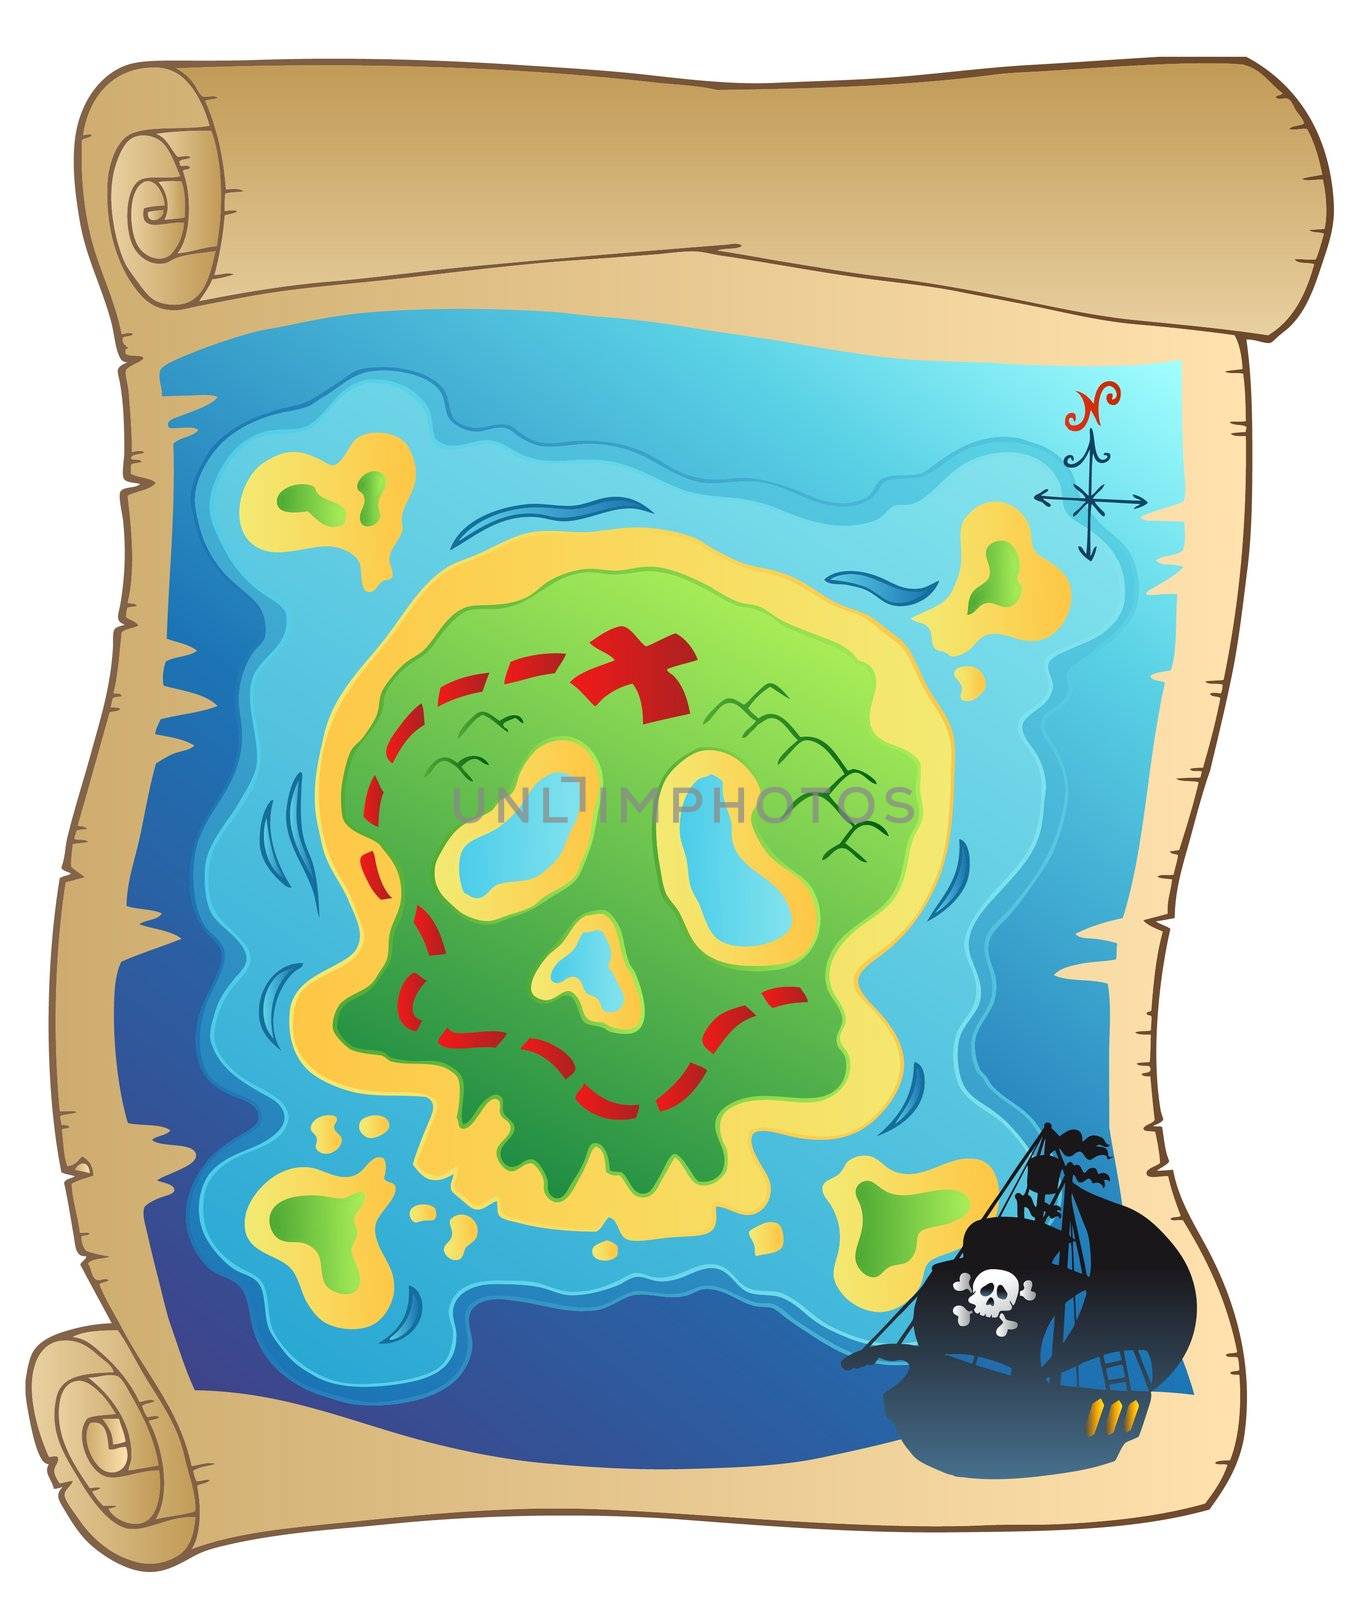 Old parchment with pirate map - vector illustration.